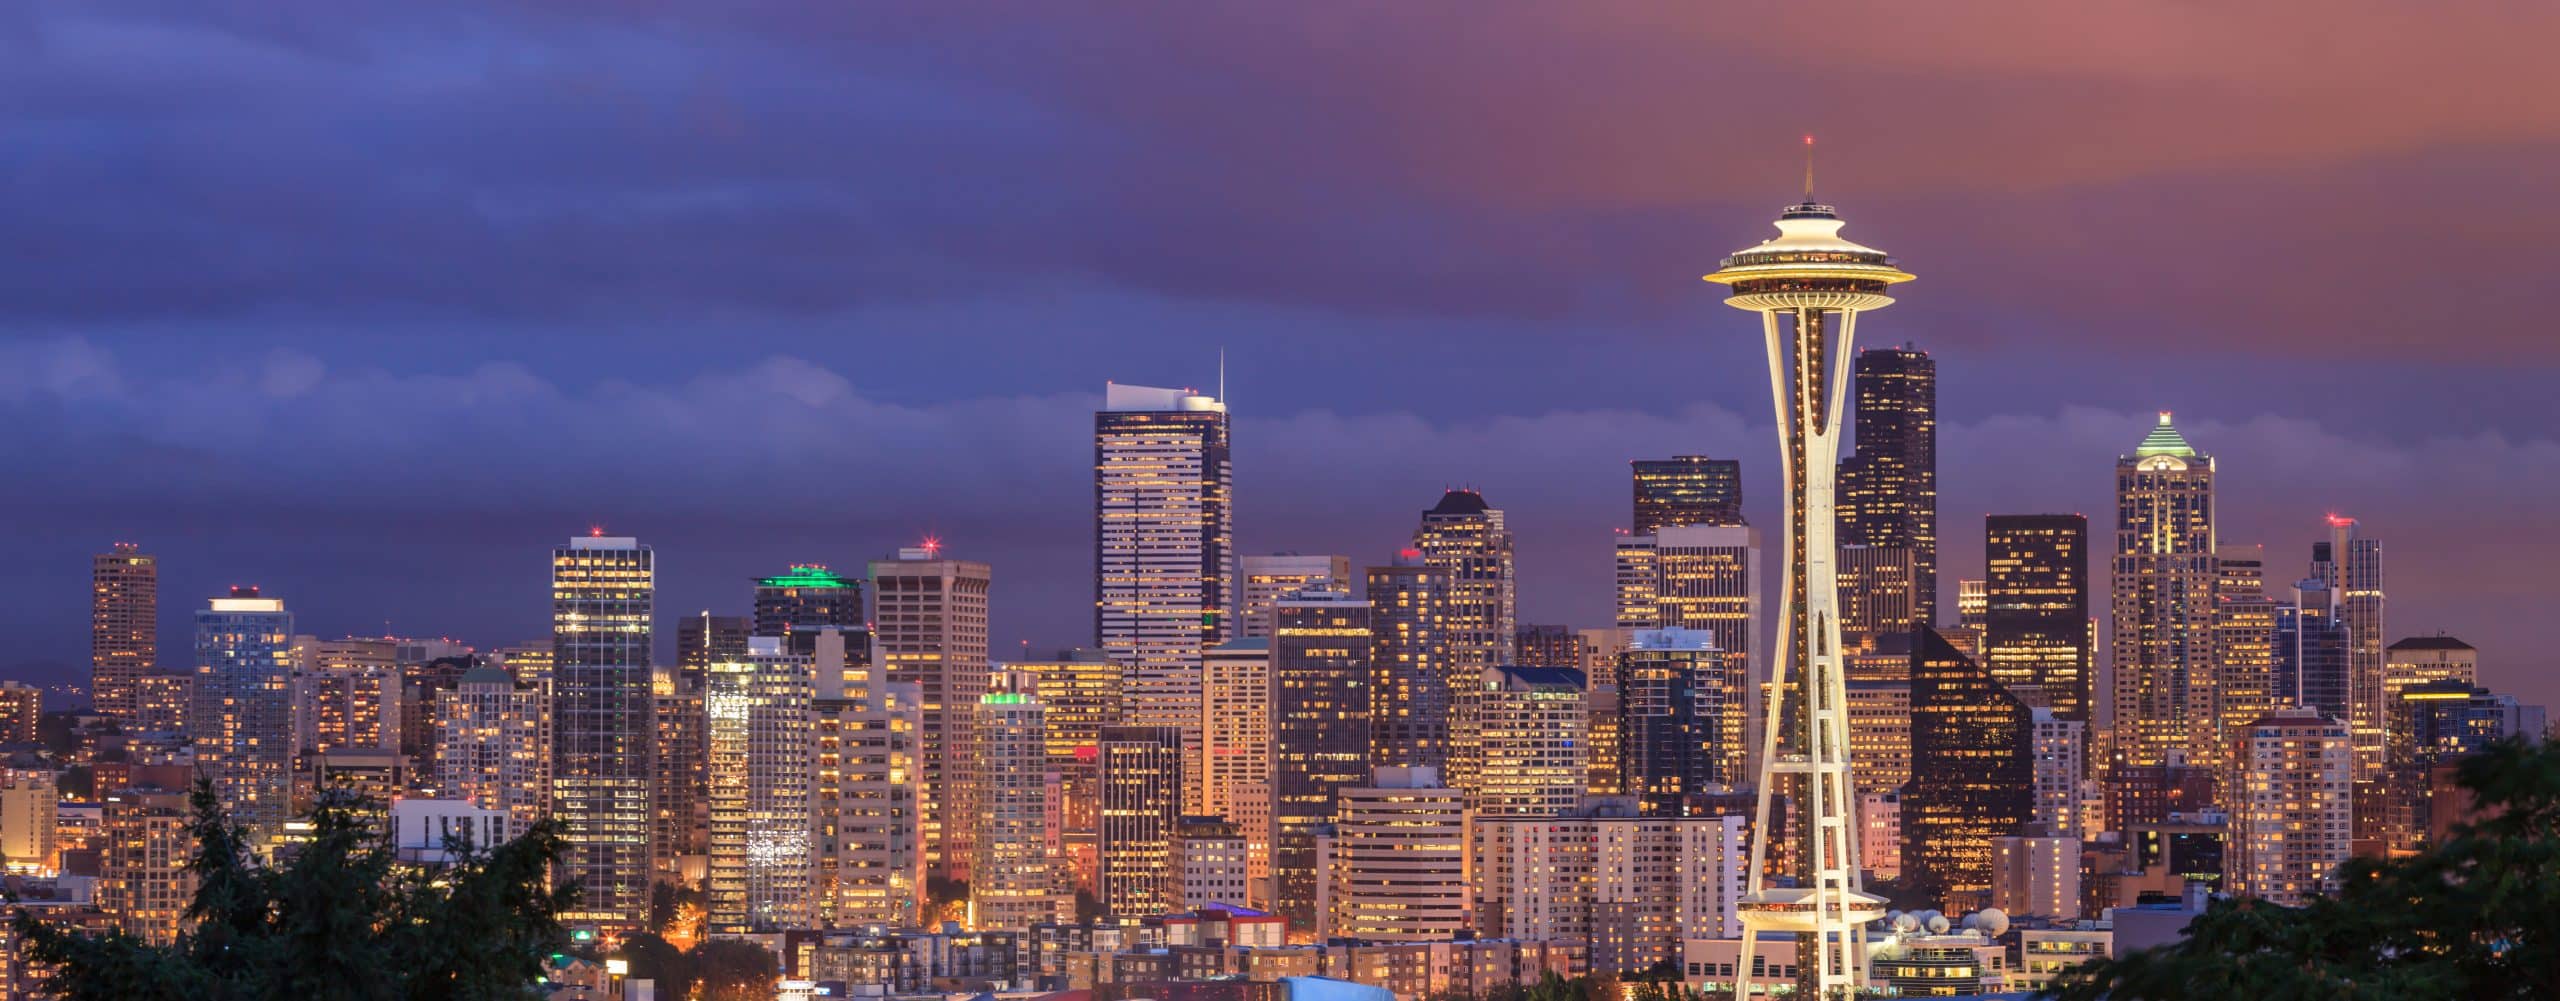 CBRE Team in Seattle Leverage ClientLook CRM for CRE Business